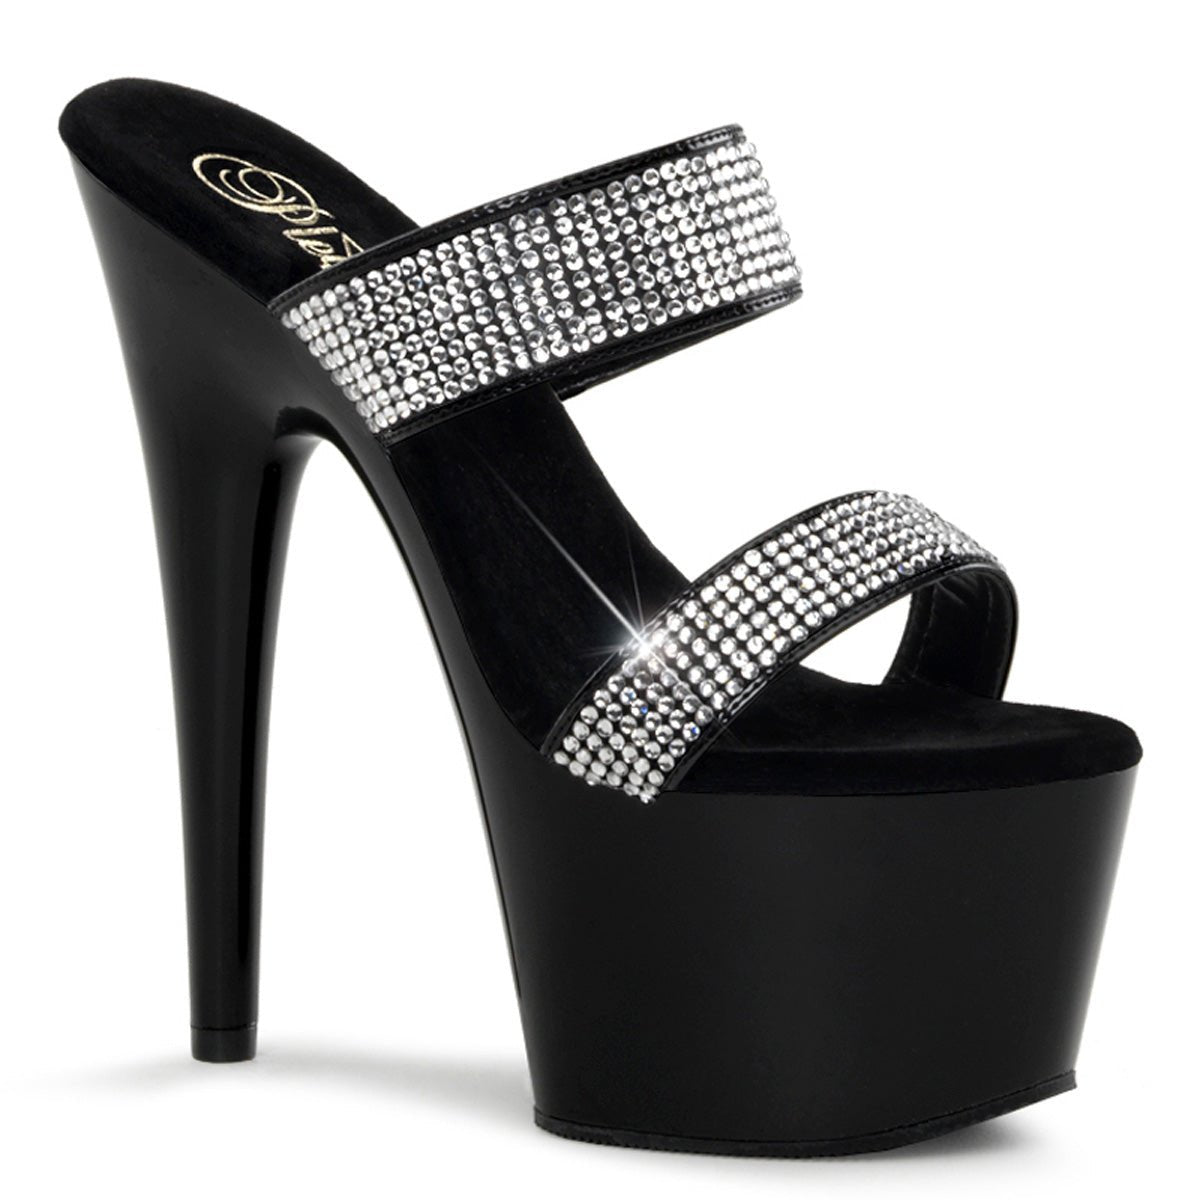 Clearance Pleaser Adore 702-2 Black Size 3UK/6USA - From Clearance Sold By Alternative Footwear